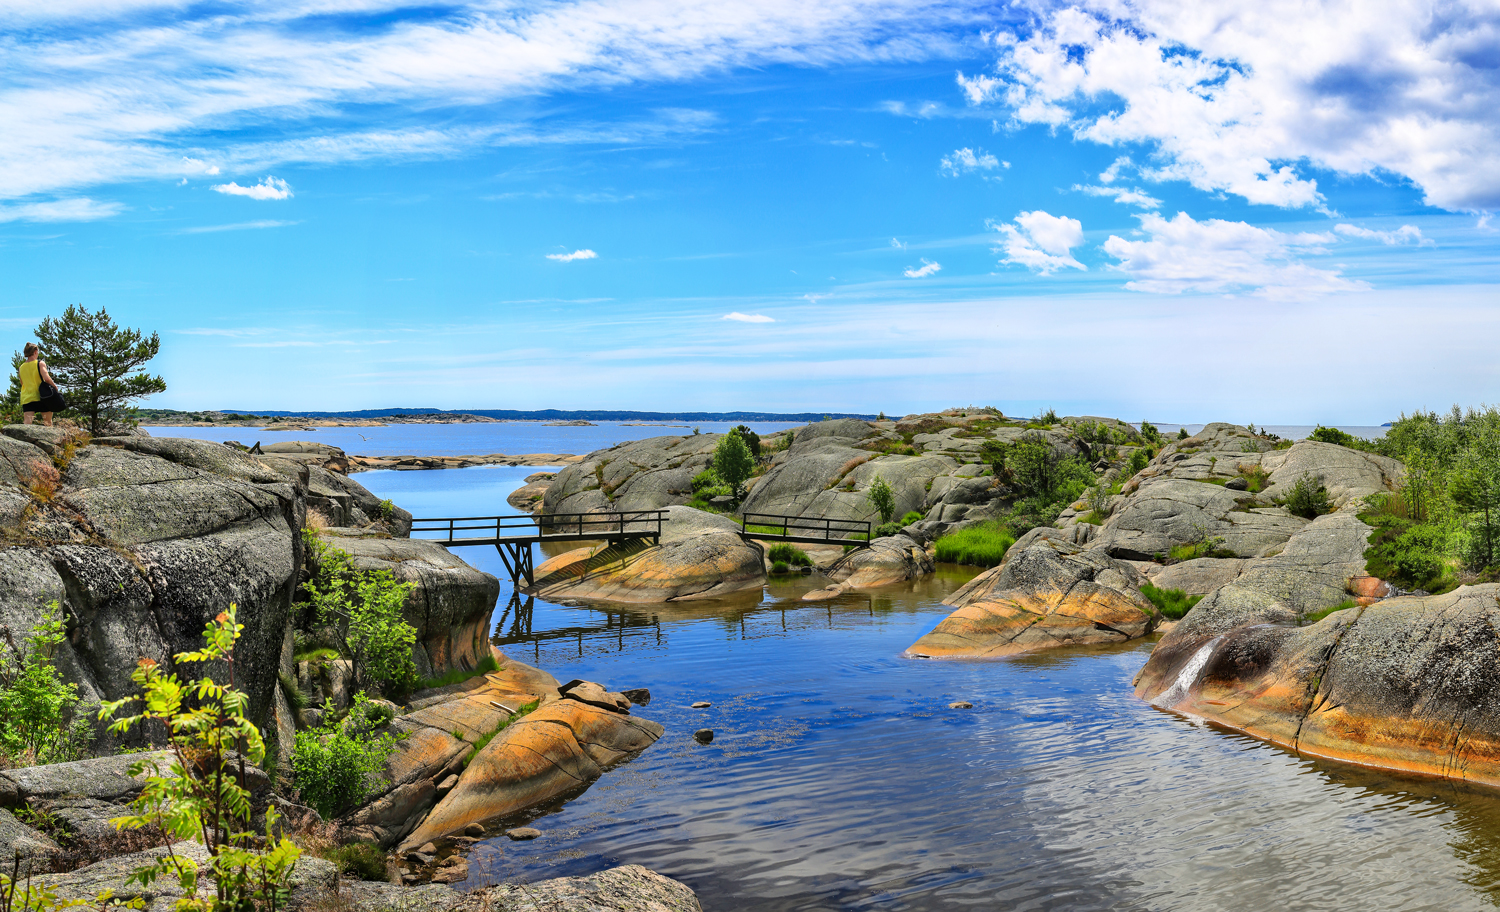  Fall in love with   THE    ARCHIPELAGO    ALL YEAR  